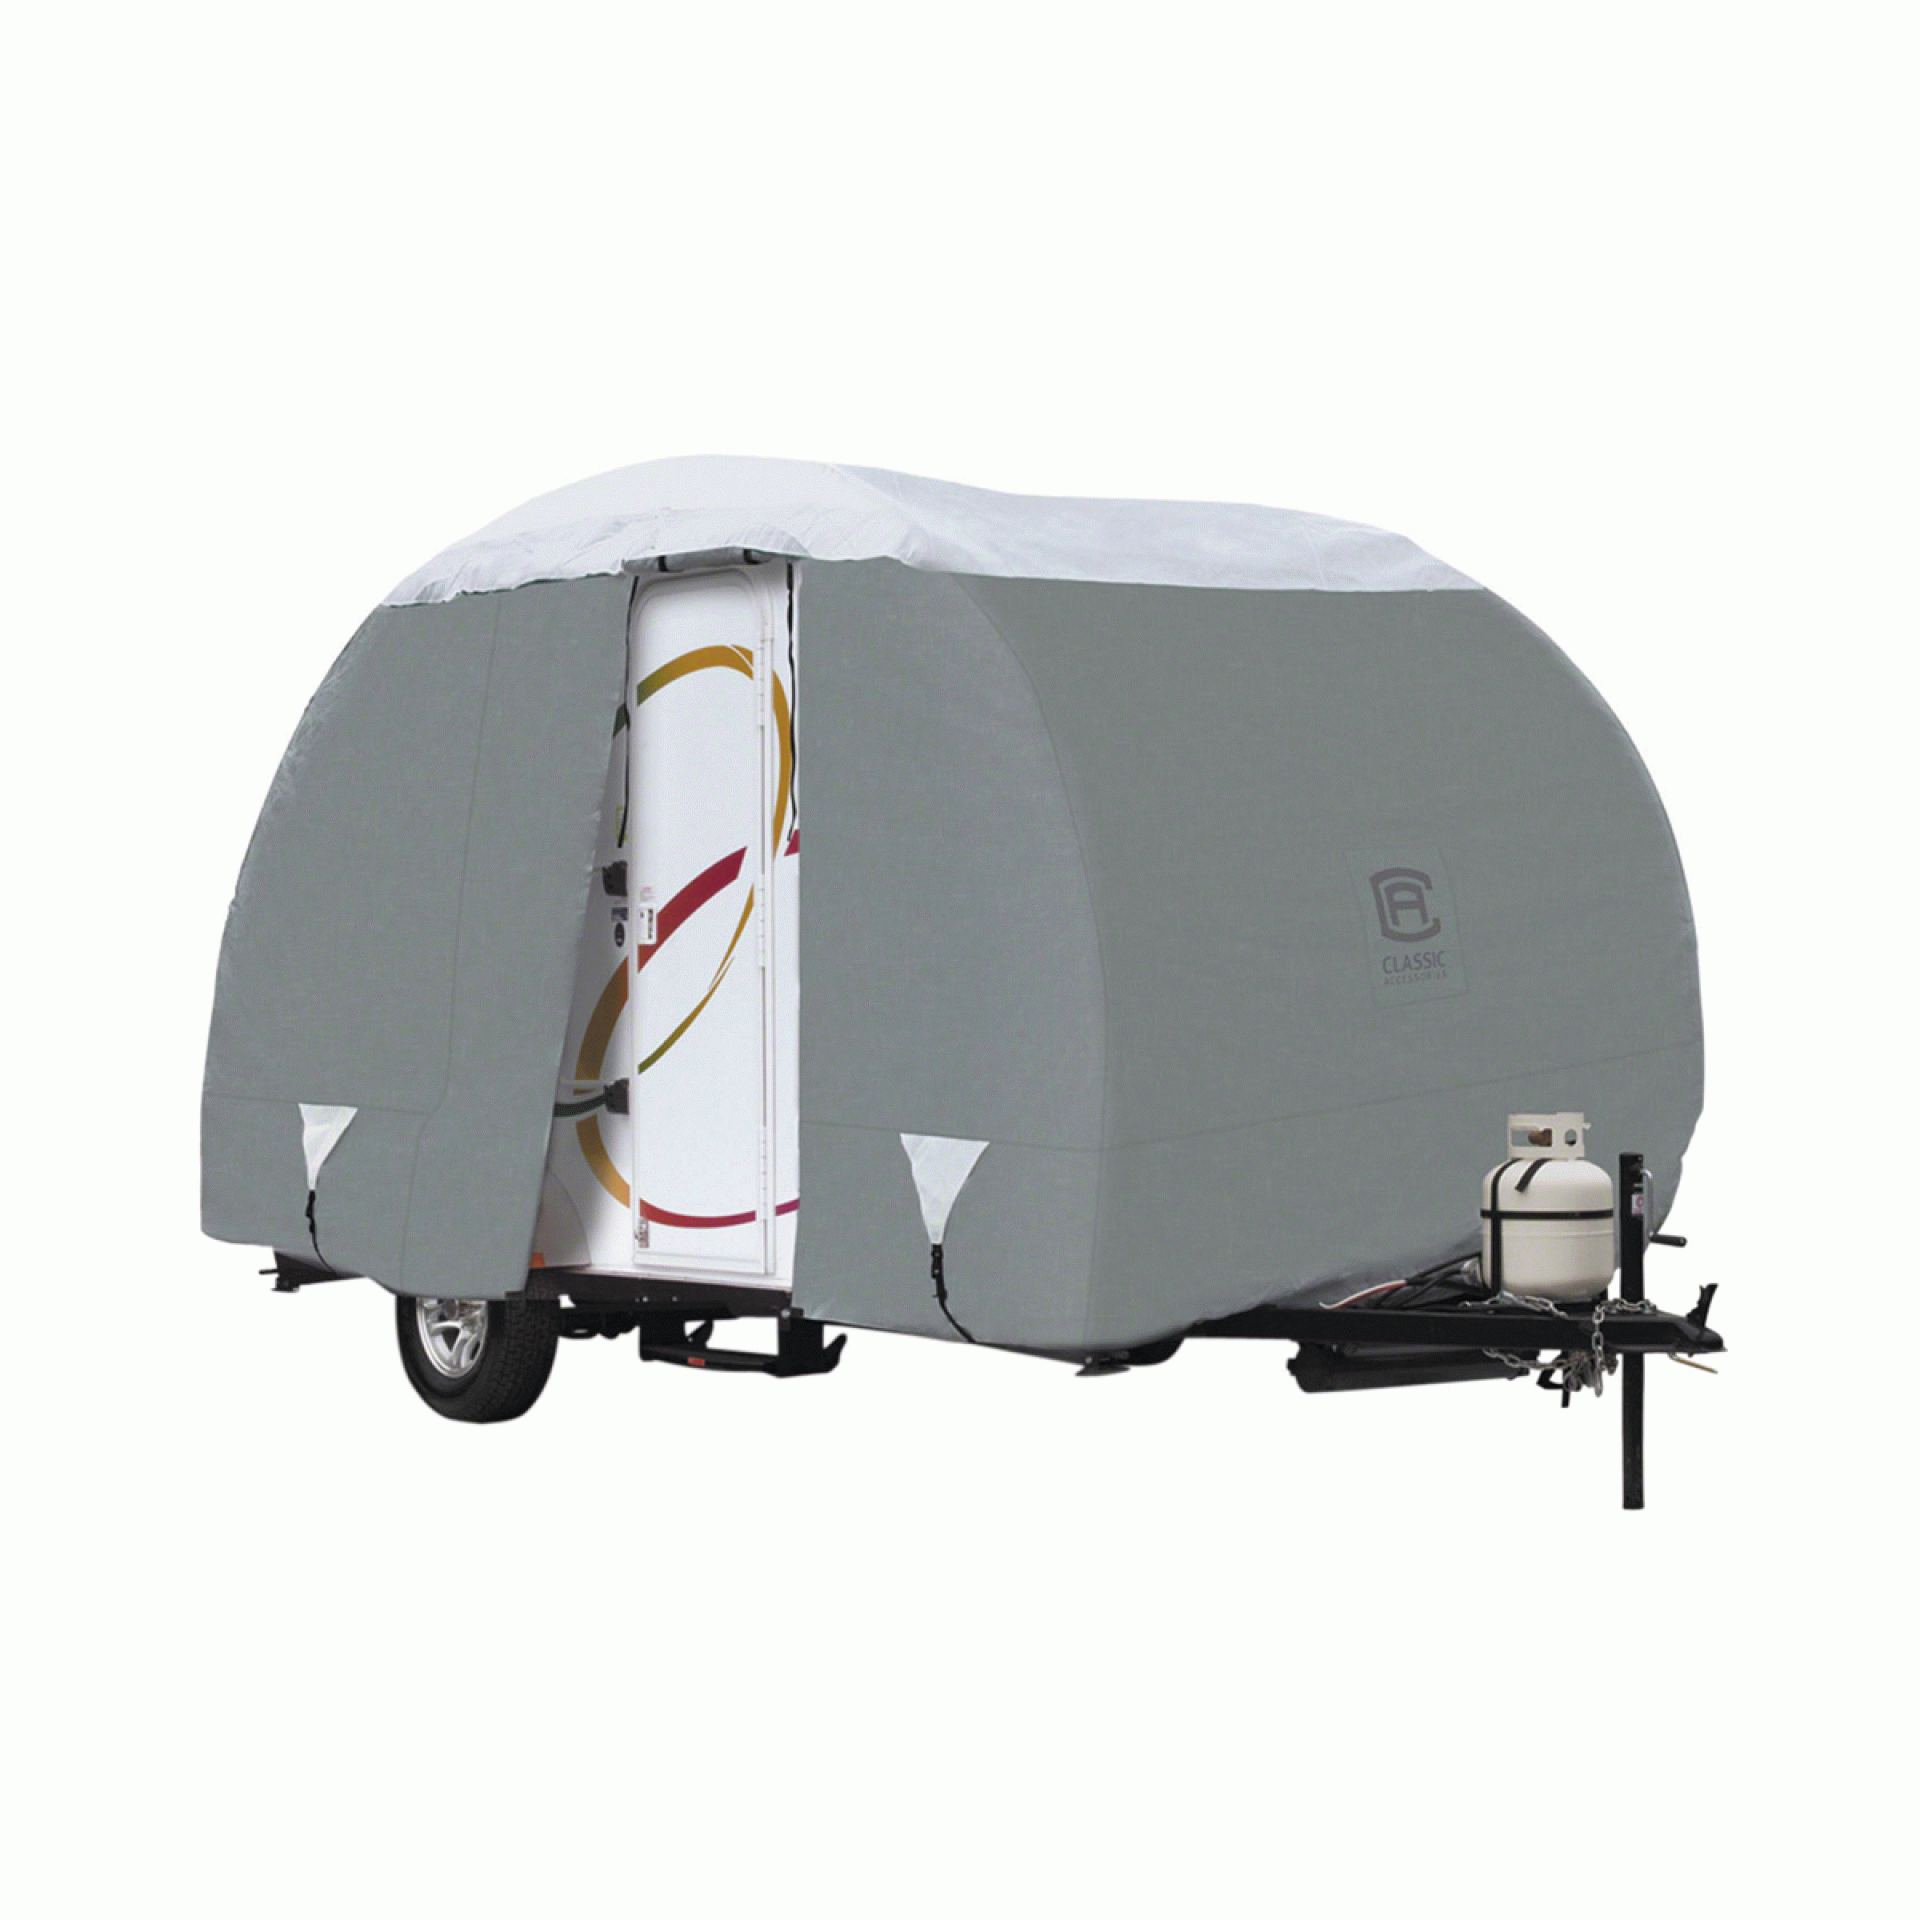 CLASSIC ACCESSORIES | 80-198-141001-00 | R-POD TRAVEL TRAILER COVER UP TO 16' 6"